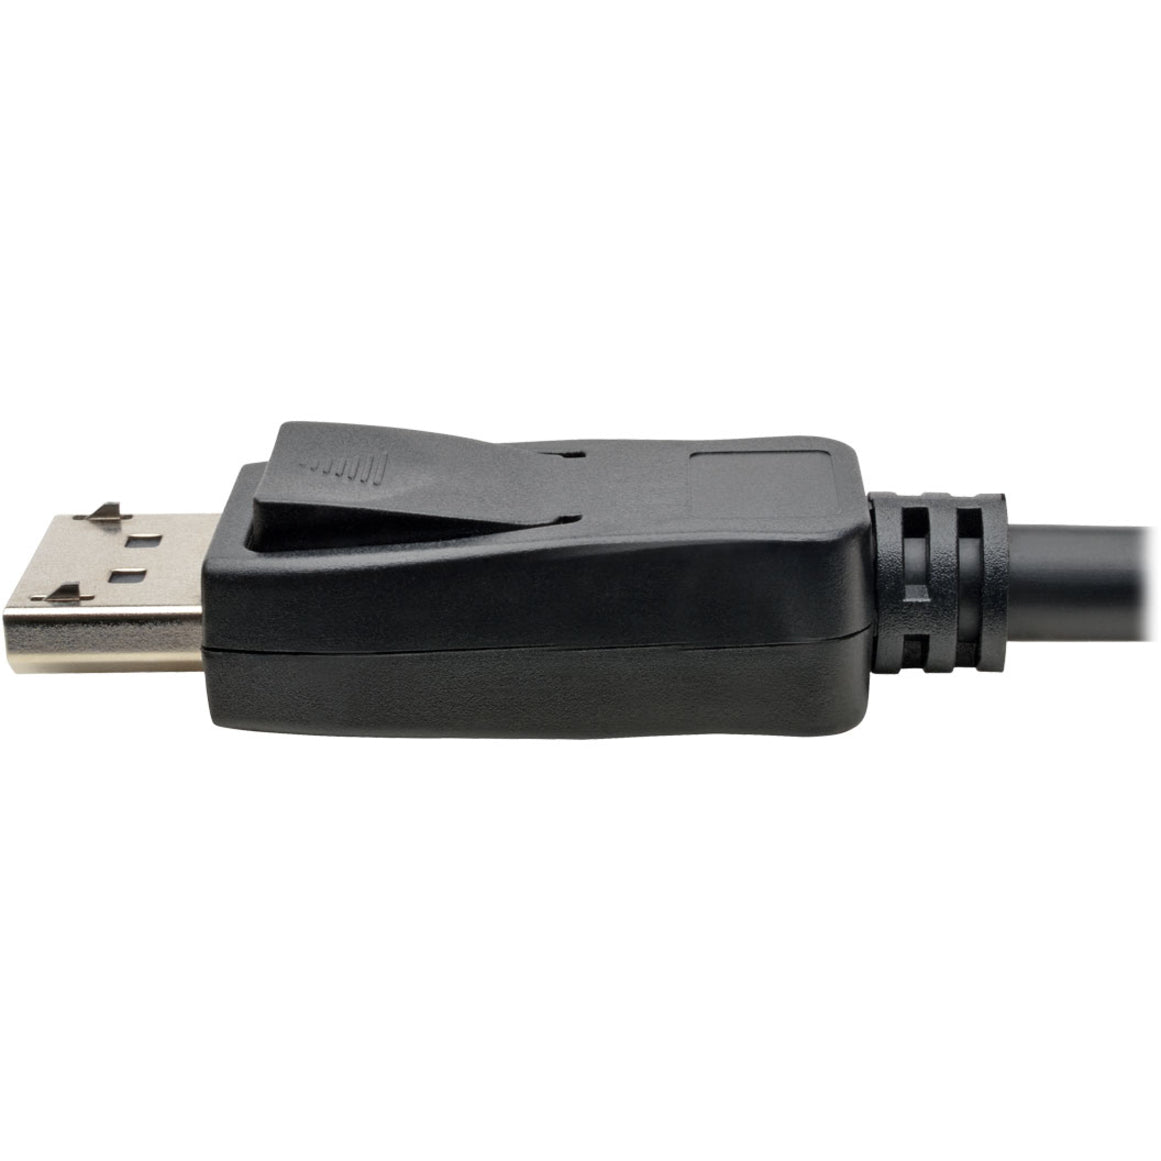 Tripp Lite P582-012-HD-V2A DisplayPort 1.2a to HDMI Active Adapter Cable (M/M), 12 ft.